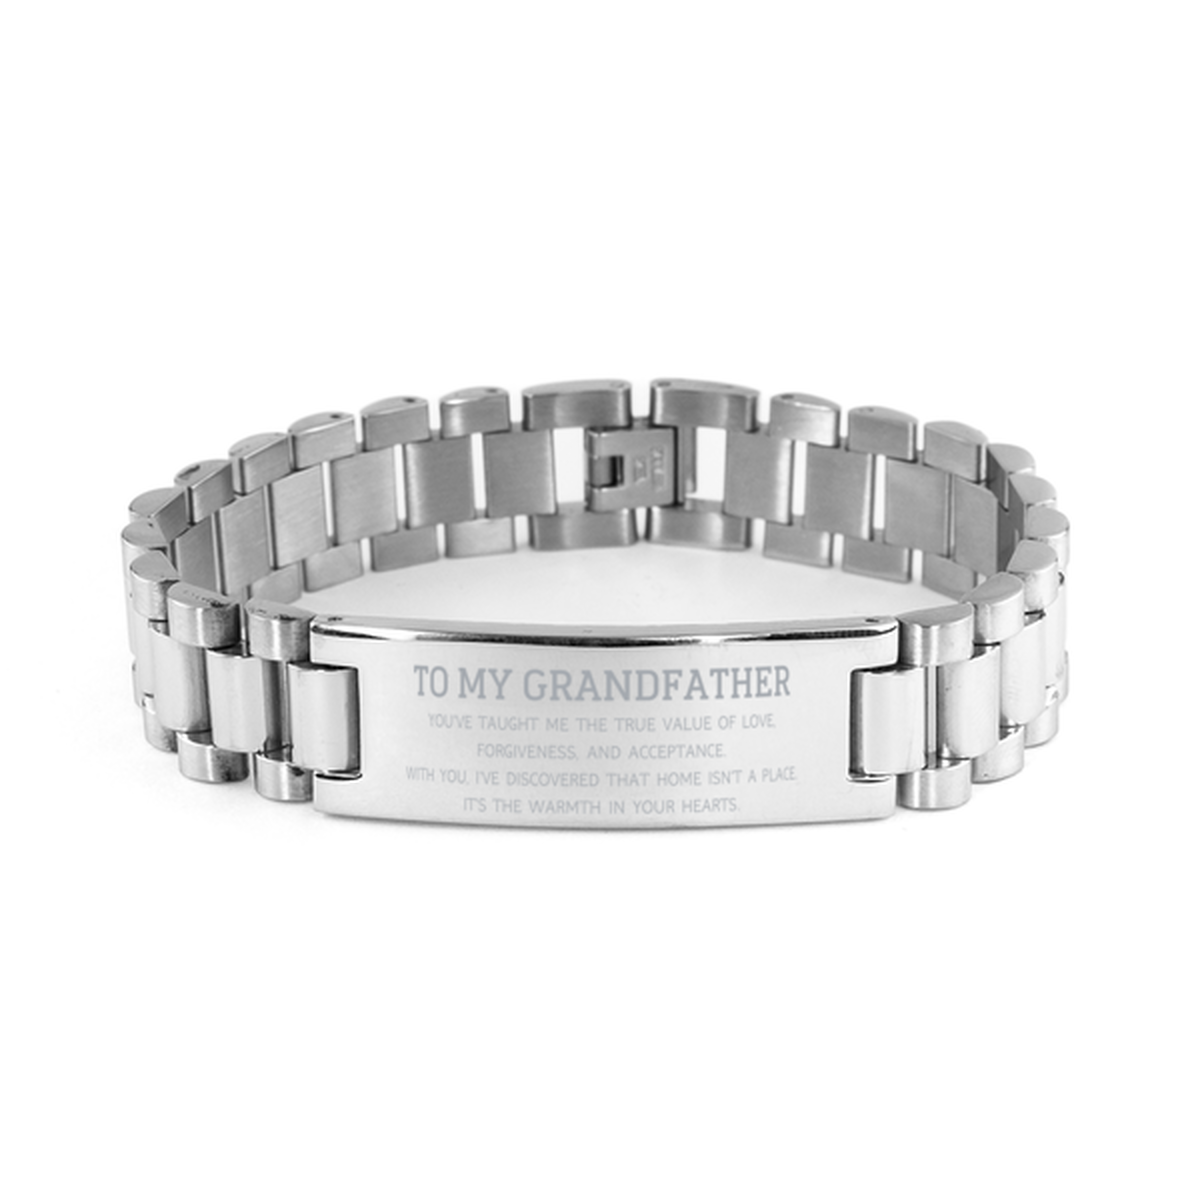 To My Grandfather Gifts, You've taught me the true value of love, Thank You Gifts For Grandfather, Birthday Ladder Stainless Steel Bracelet For Grandfather